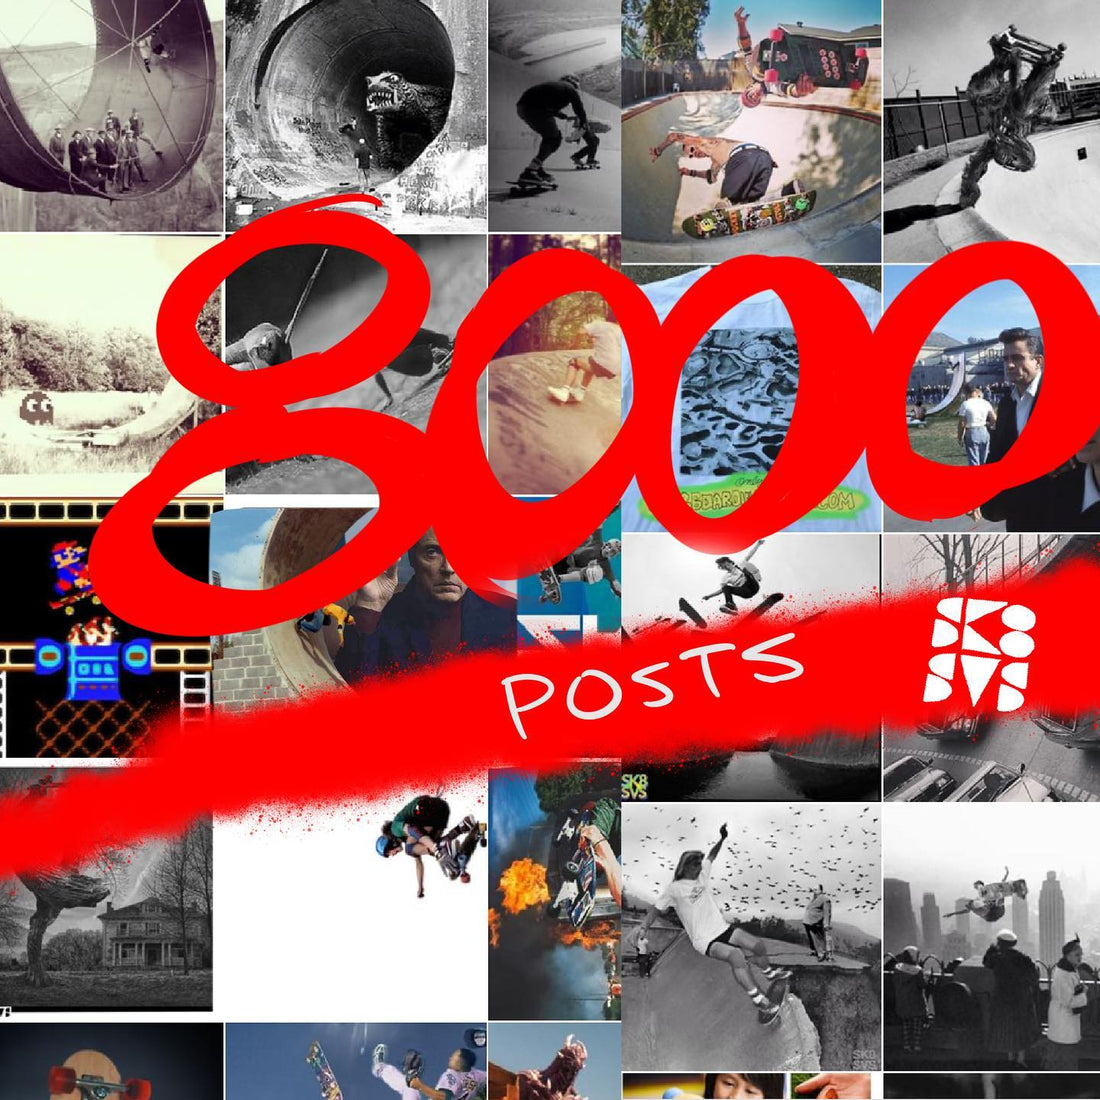 This is my 8000th post.
Thanks...